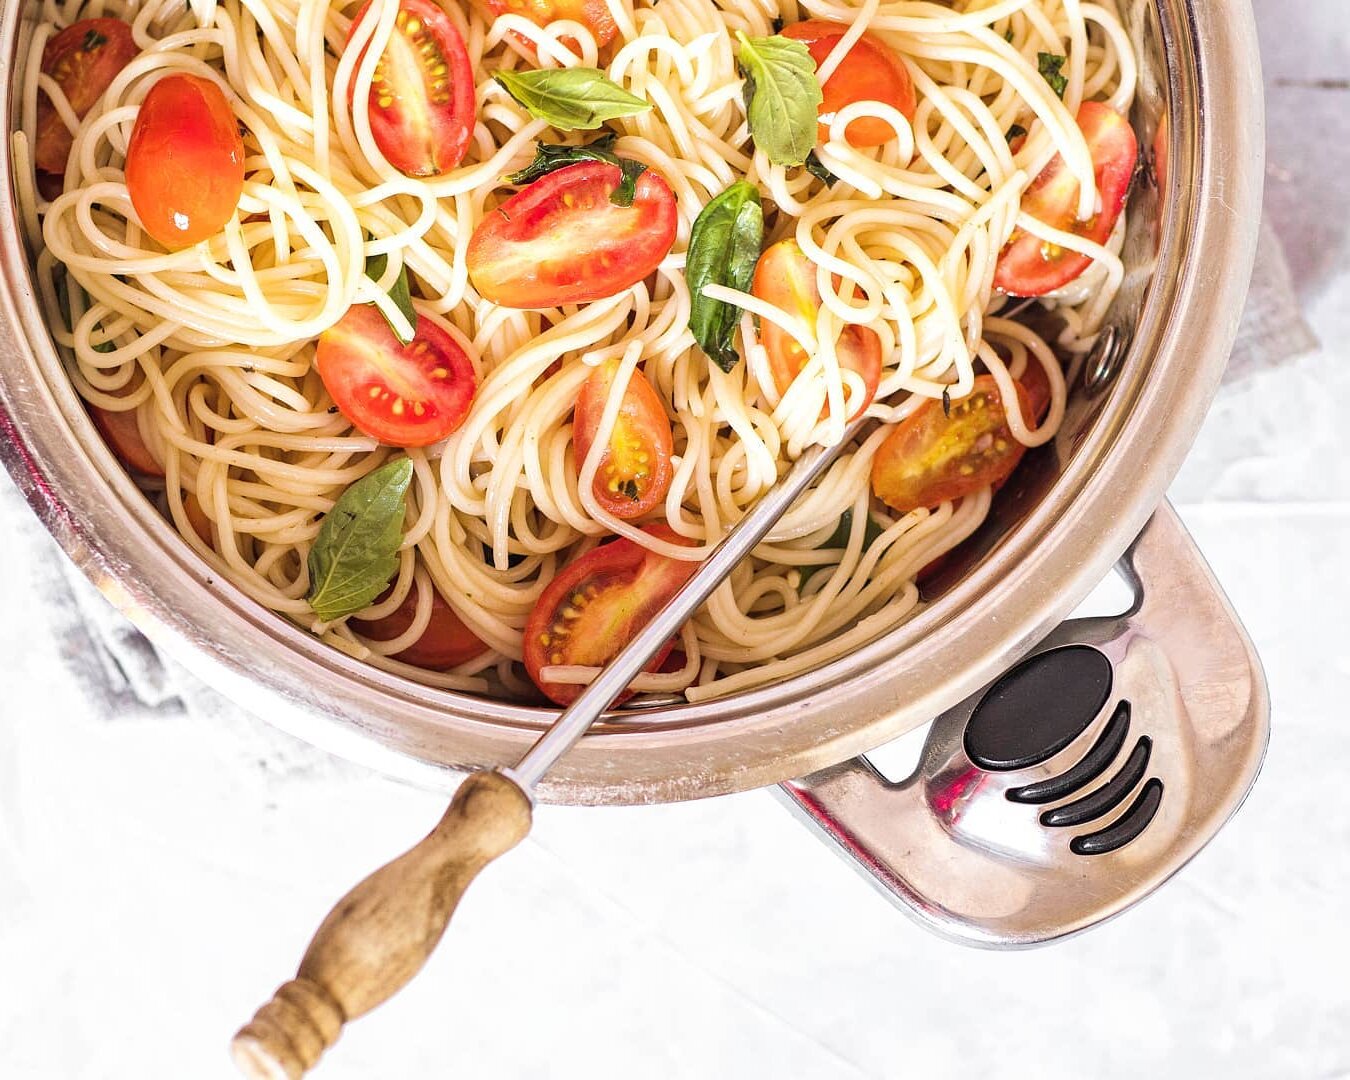 Spicy Spaghetti Recipe Loaded With Fresh Herbs